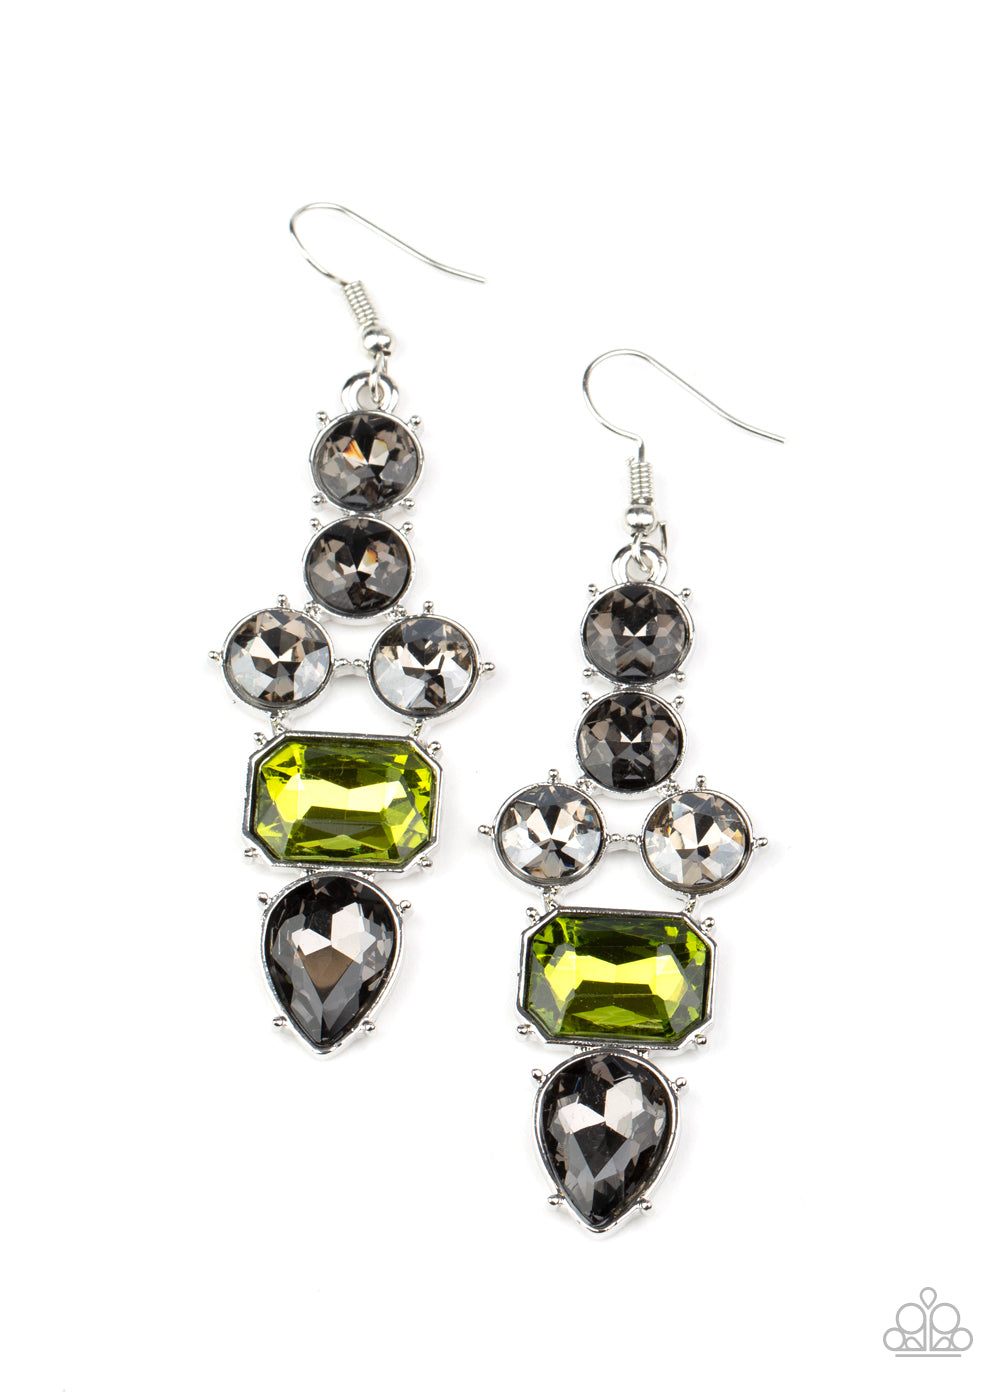 &lt;P&gt;Featuring emerald, round, and teardrop shapes, a sparkly series of smoky and green rhinestones coalesce into a dramatically regal lure. Earring attaches to a standard fishhook fitting.&lt;/P&gt;  

&lt;P&gt; &lt;I&gt;  Sold as one pair of earrings. &lt;/I&gt;  &lt;/P&gt;

&lt;img src=\&quot;https://d9b54x484lq62.cloudfront.net/paparazzi/shopping/images/517_tag150x115_1.png\&quot; alt=\&quot;New Kit\&quot; align=\&quot;middle\&quot; height=\&quot;50\&quot; width=\&quot;50\&quot;/&gt;